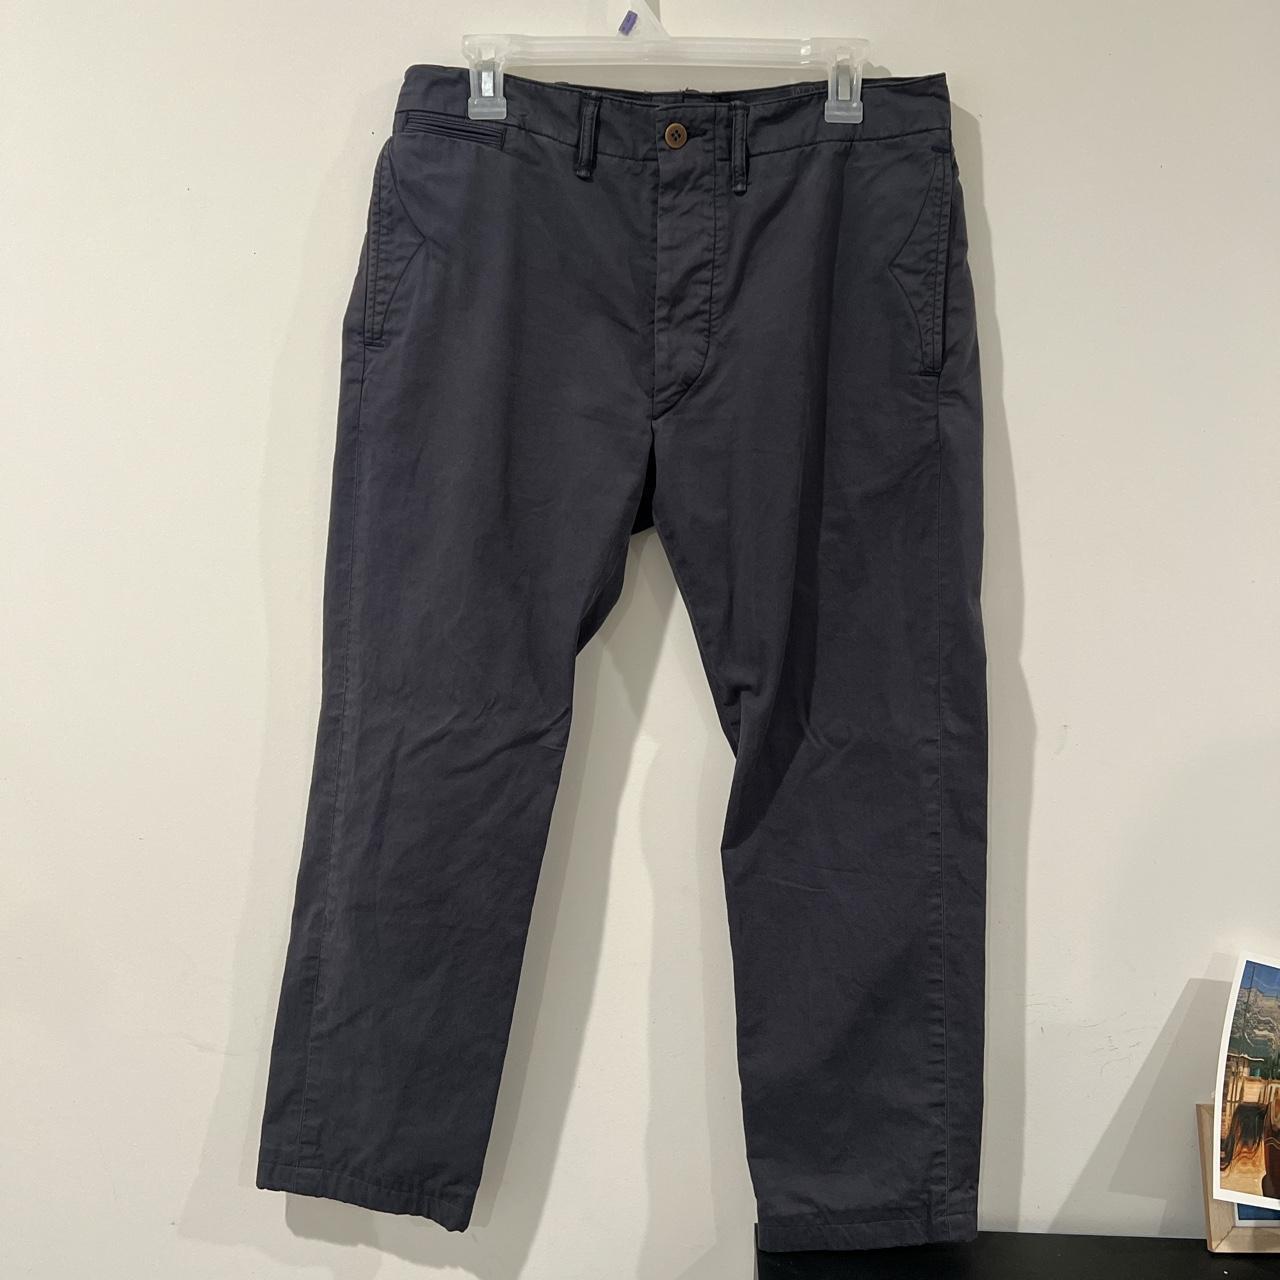 General Pants Co., New & Secondhand Fashion